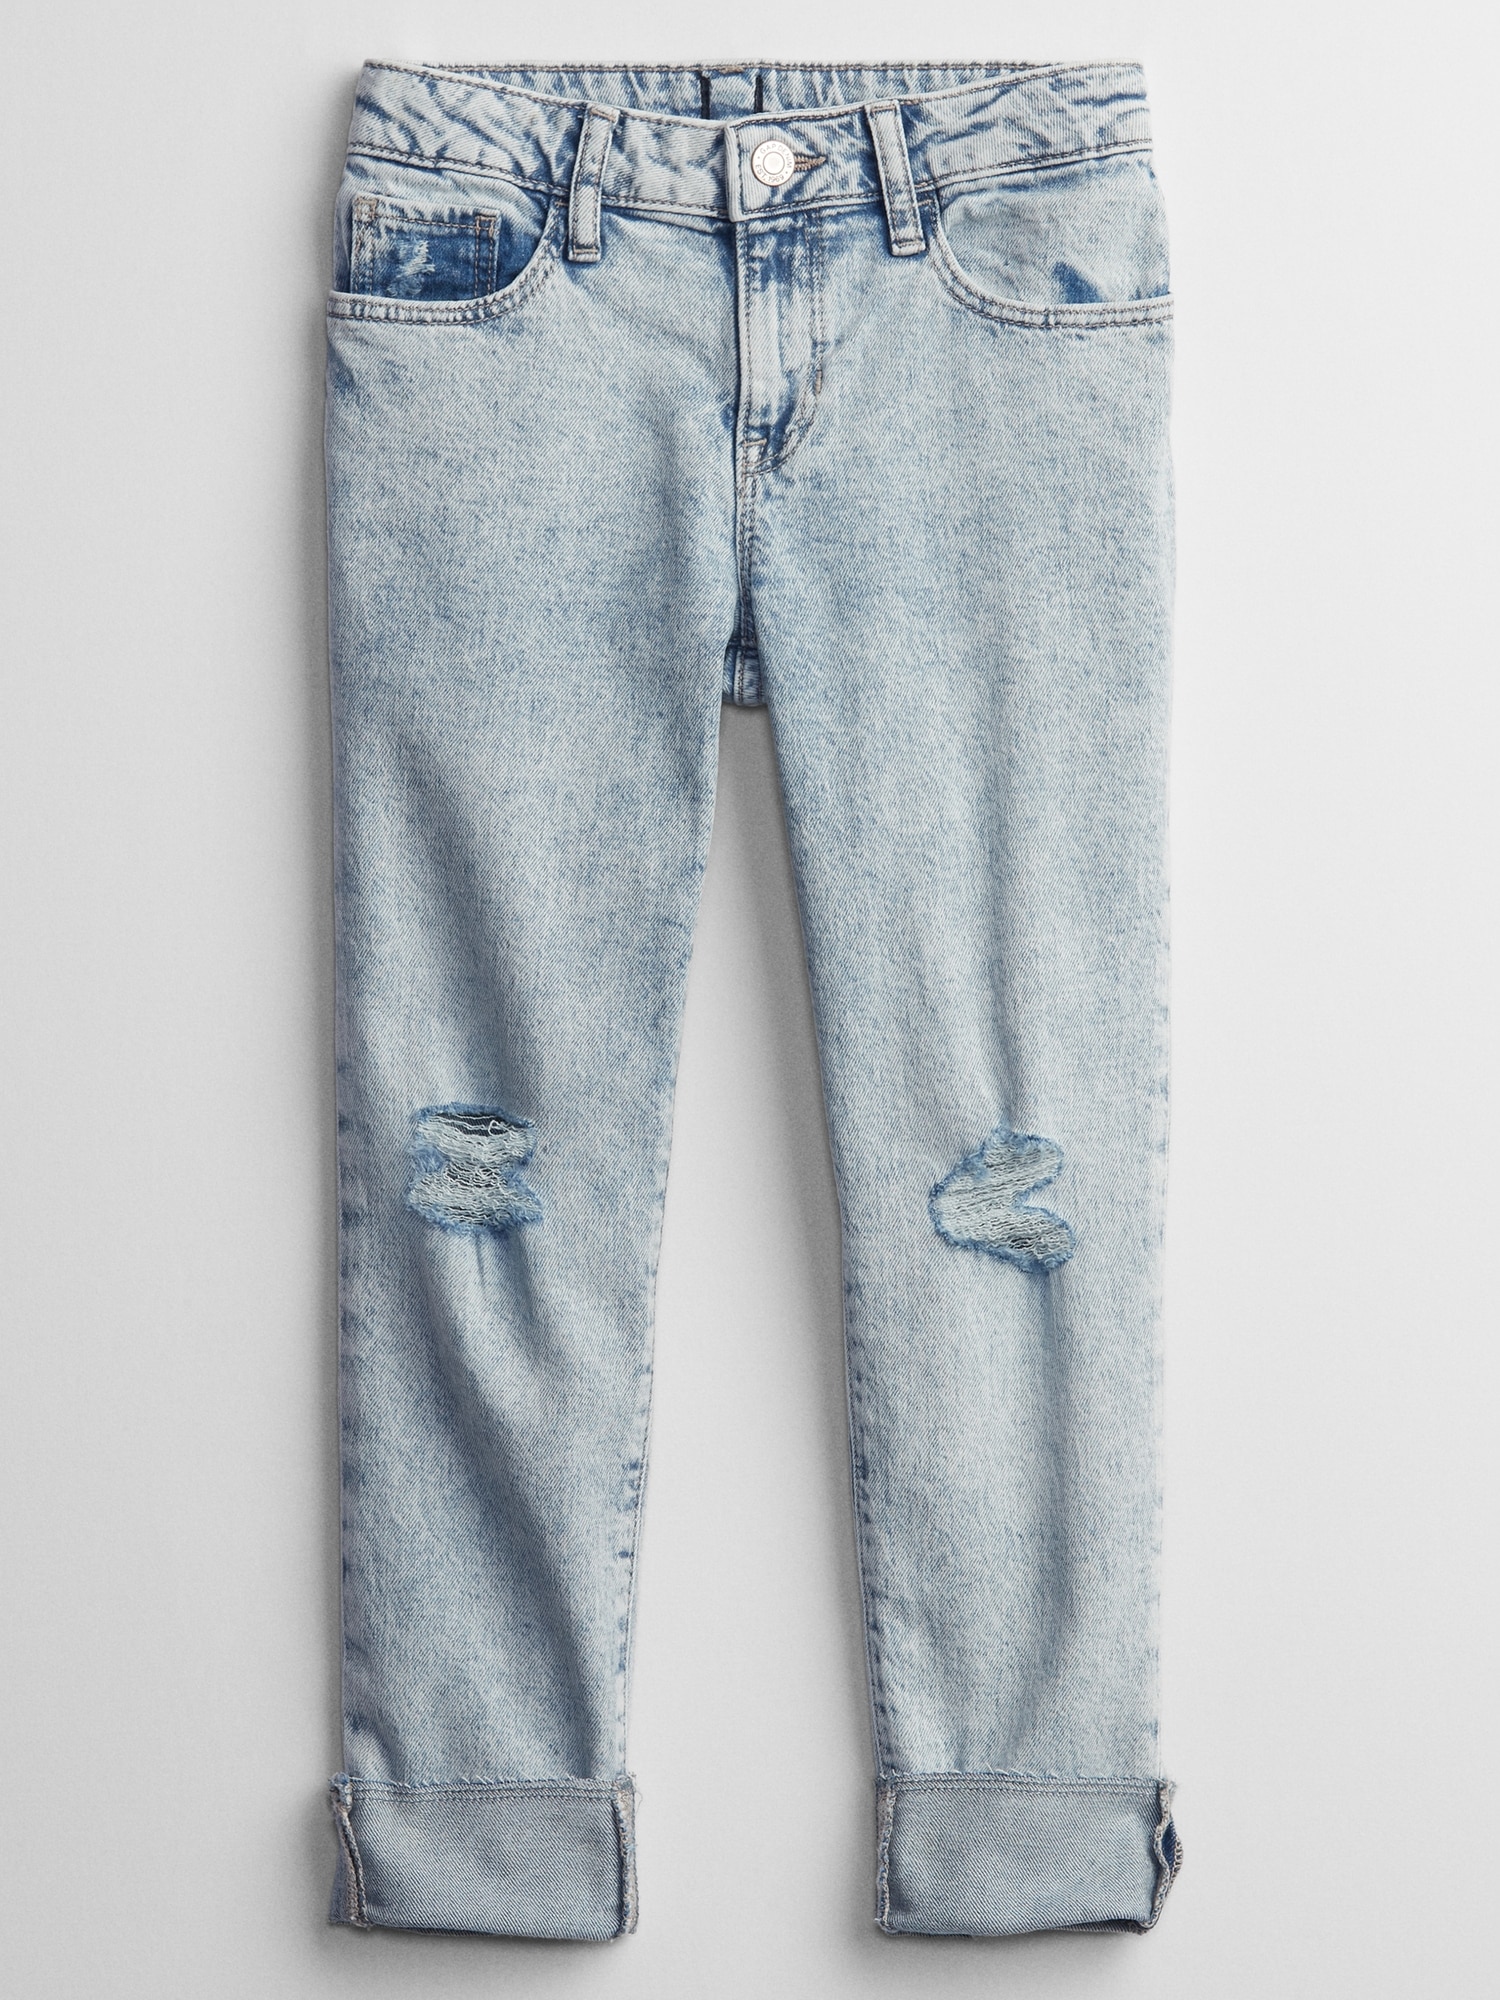 Kids Distressed Girlfriend Jeans with Washwell | Gap Factory